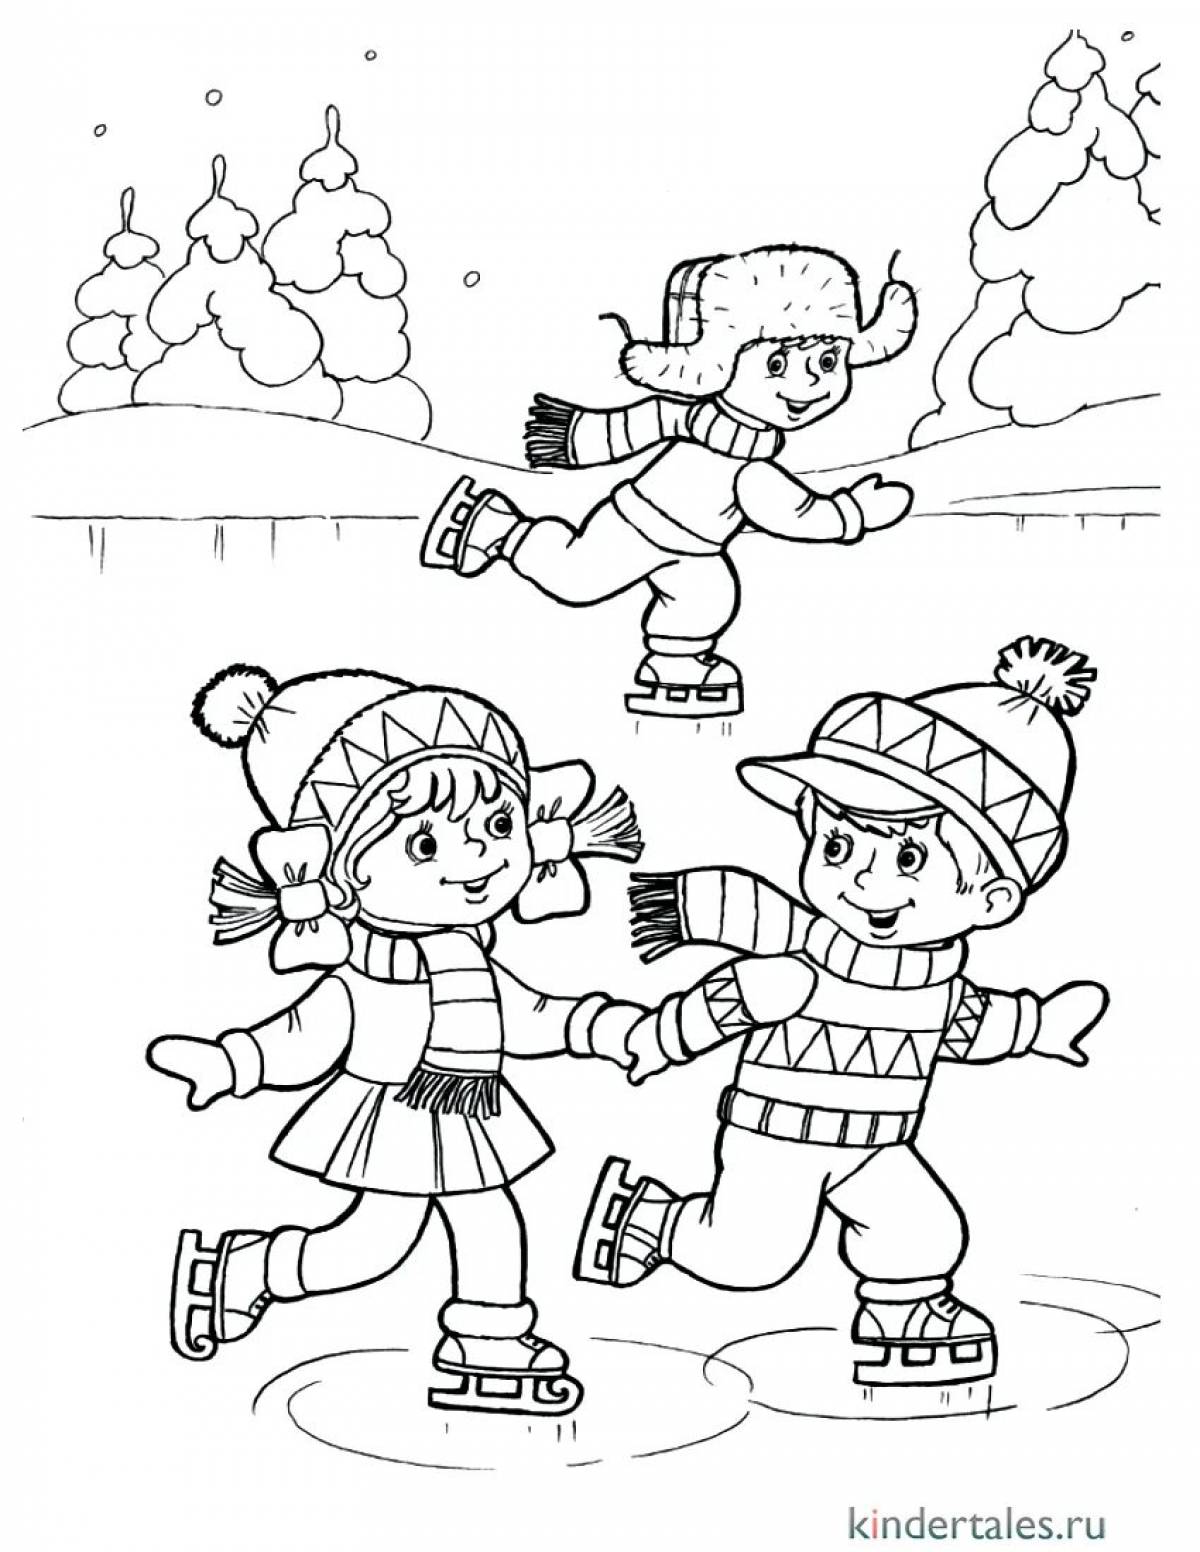 Shining ice rink coloring book for kids